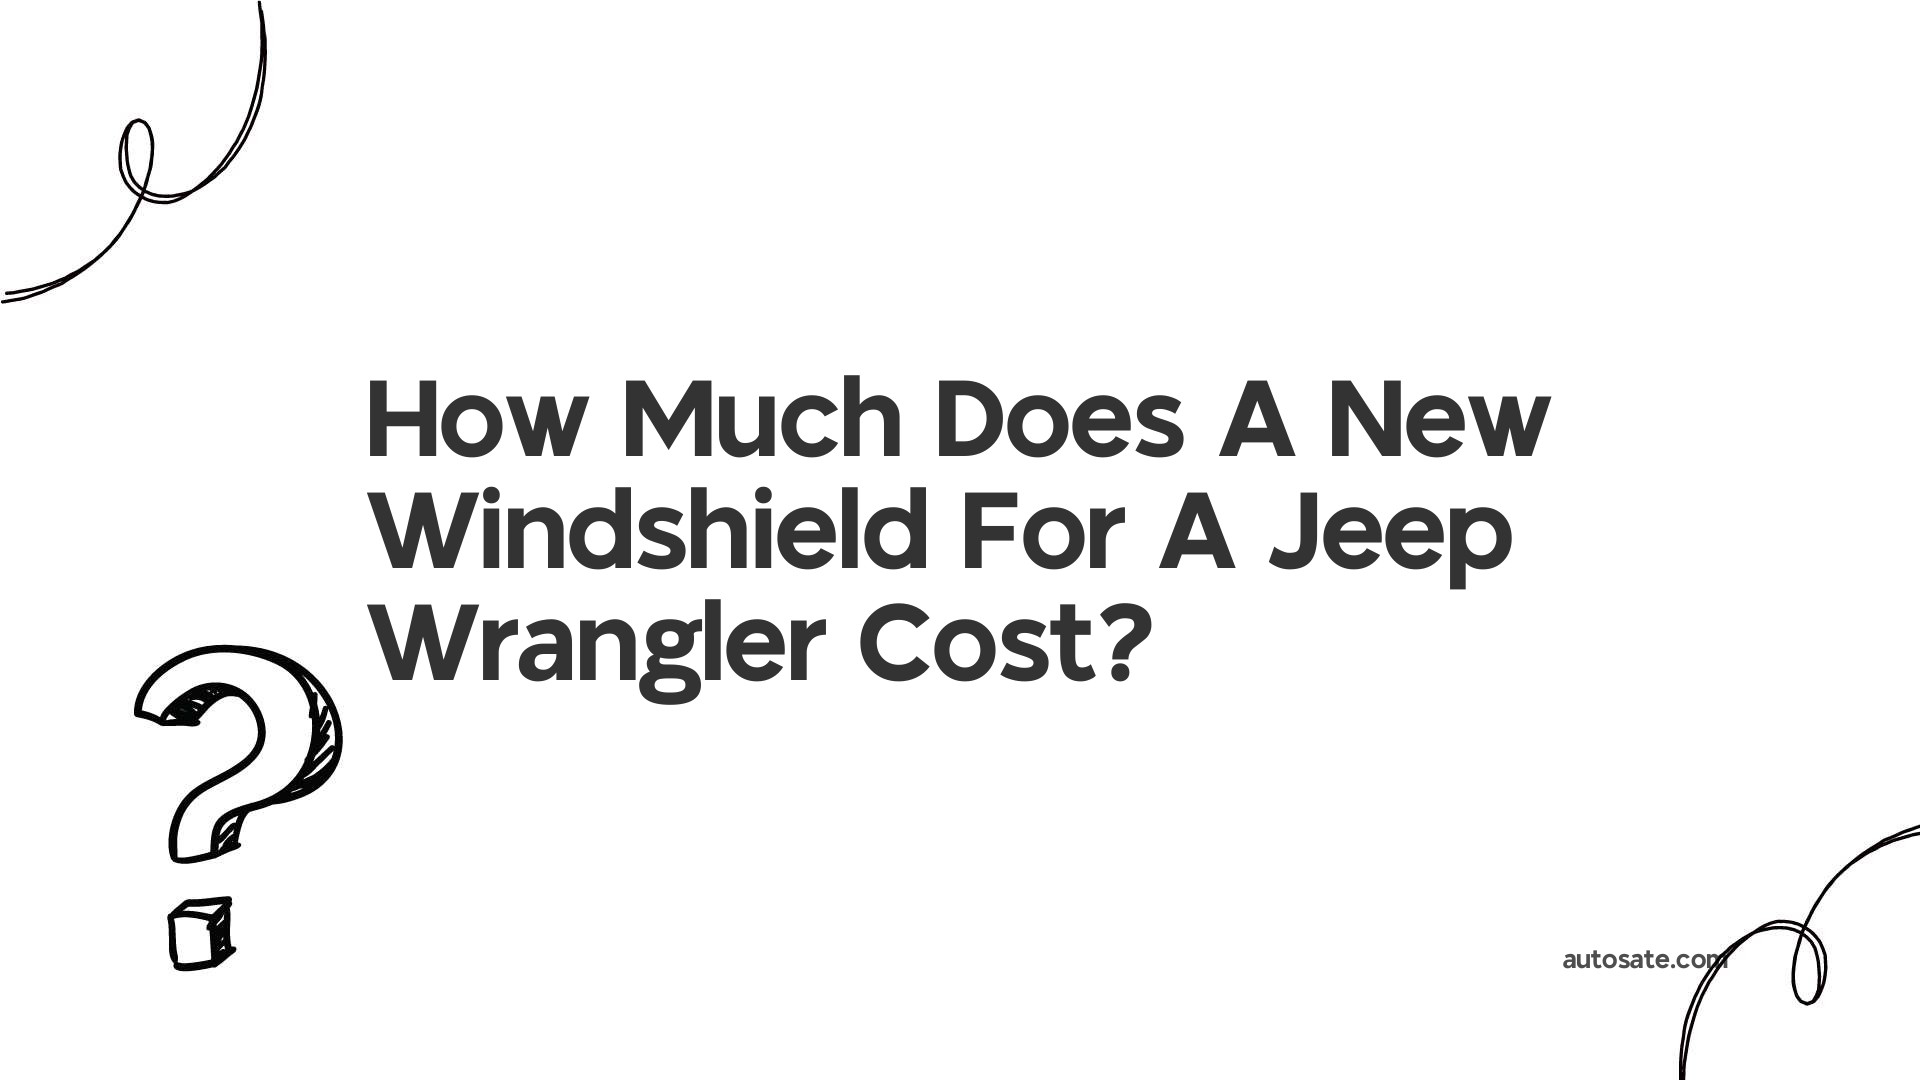 How Much Does A New Windshield For A Jeep Wrangler Cost?